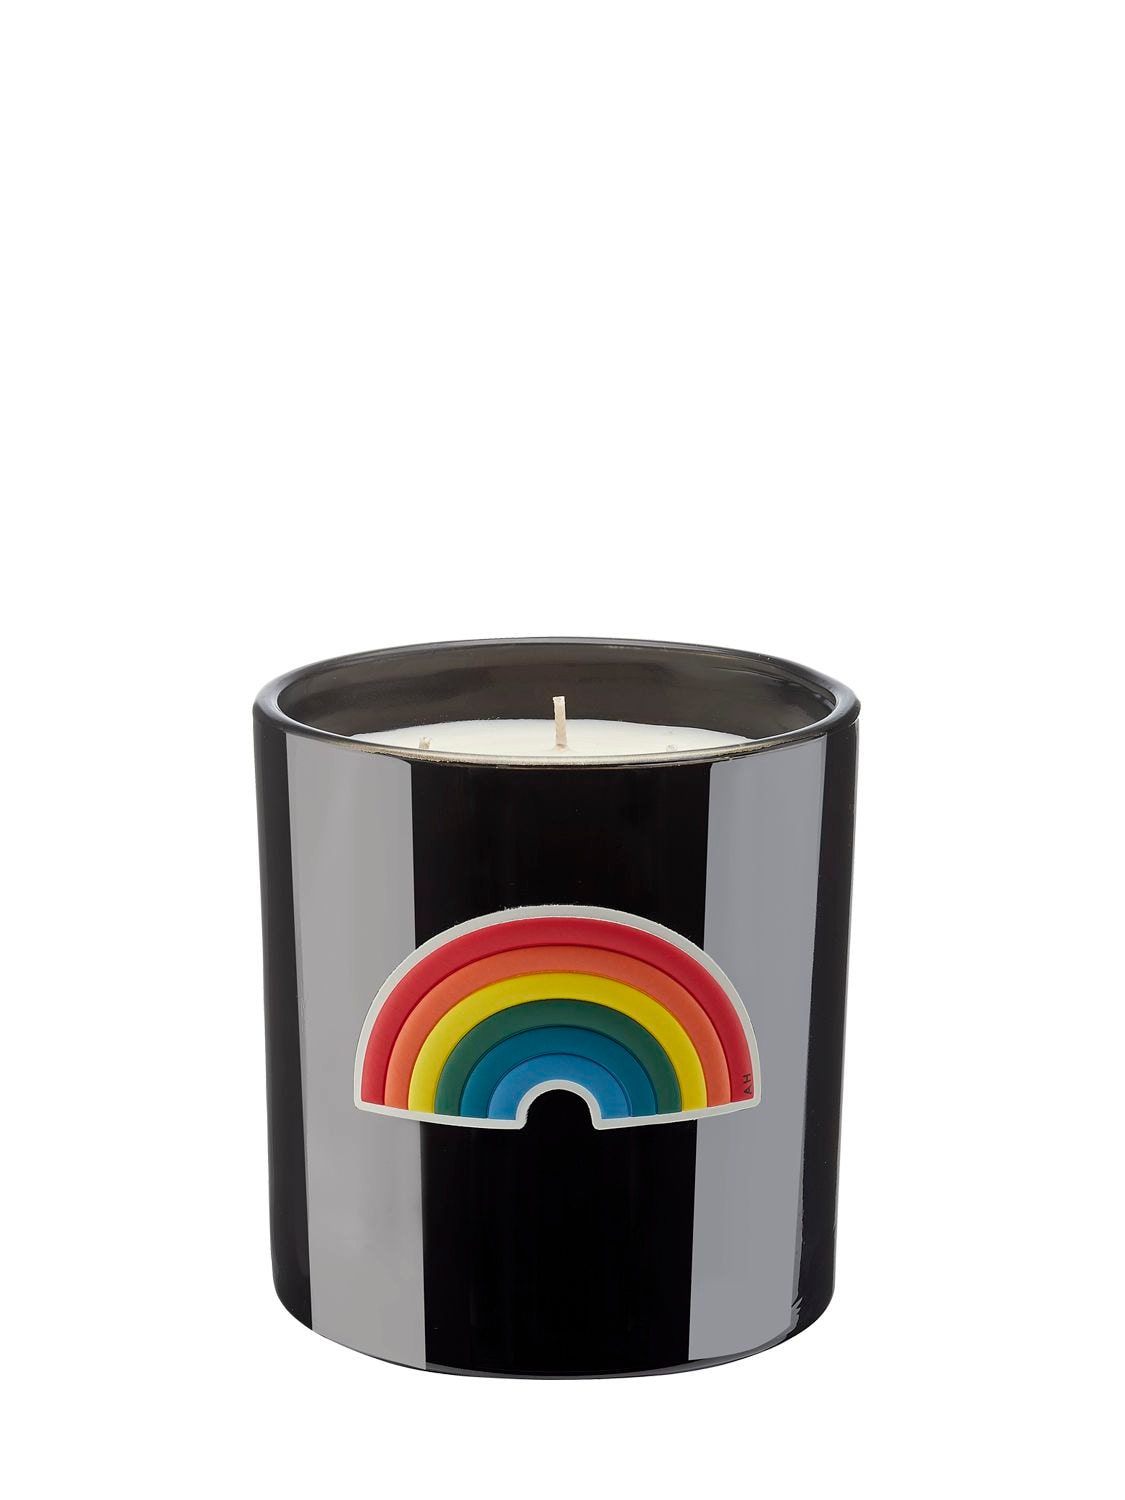 Anya Hindmarch Smells 700gr Washing Powder Scented Candle In Black